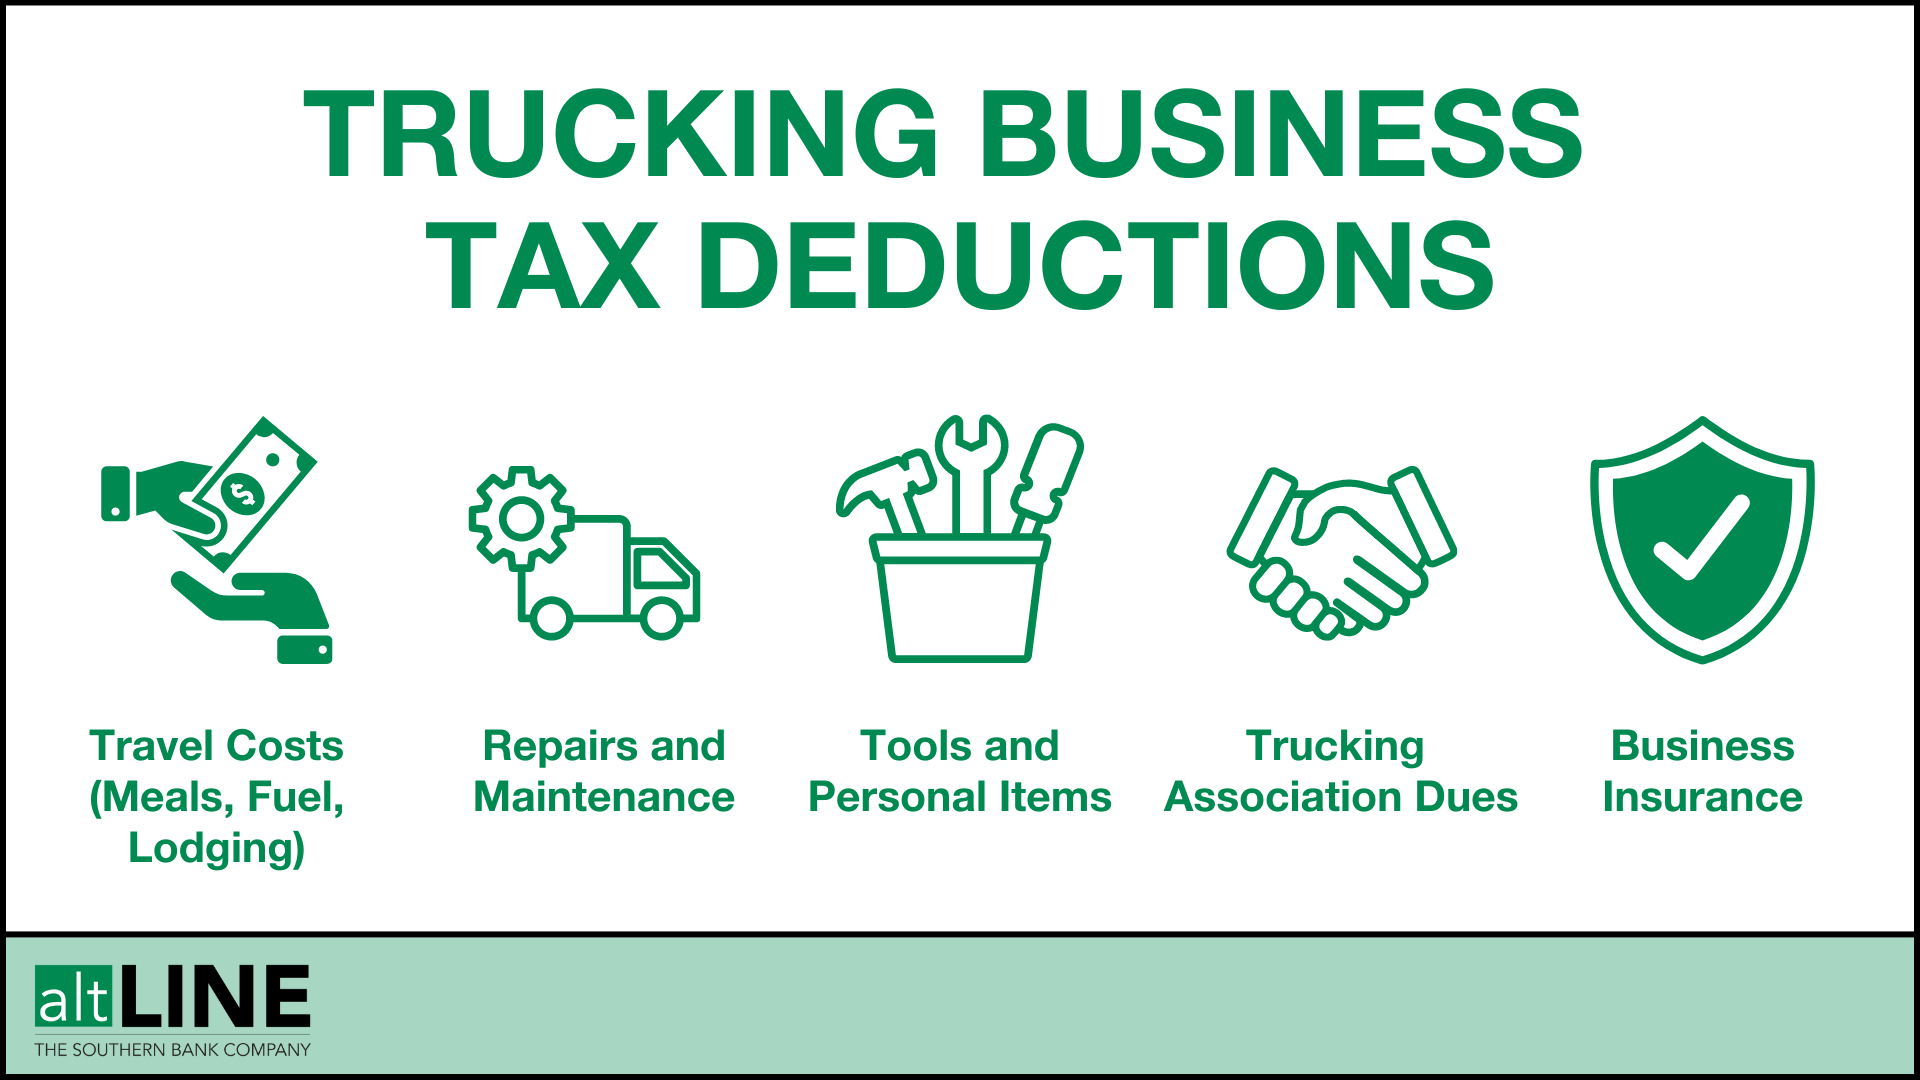 Trucking Business Tax Deductions